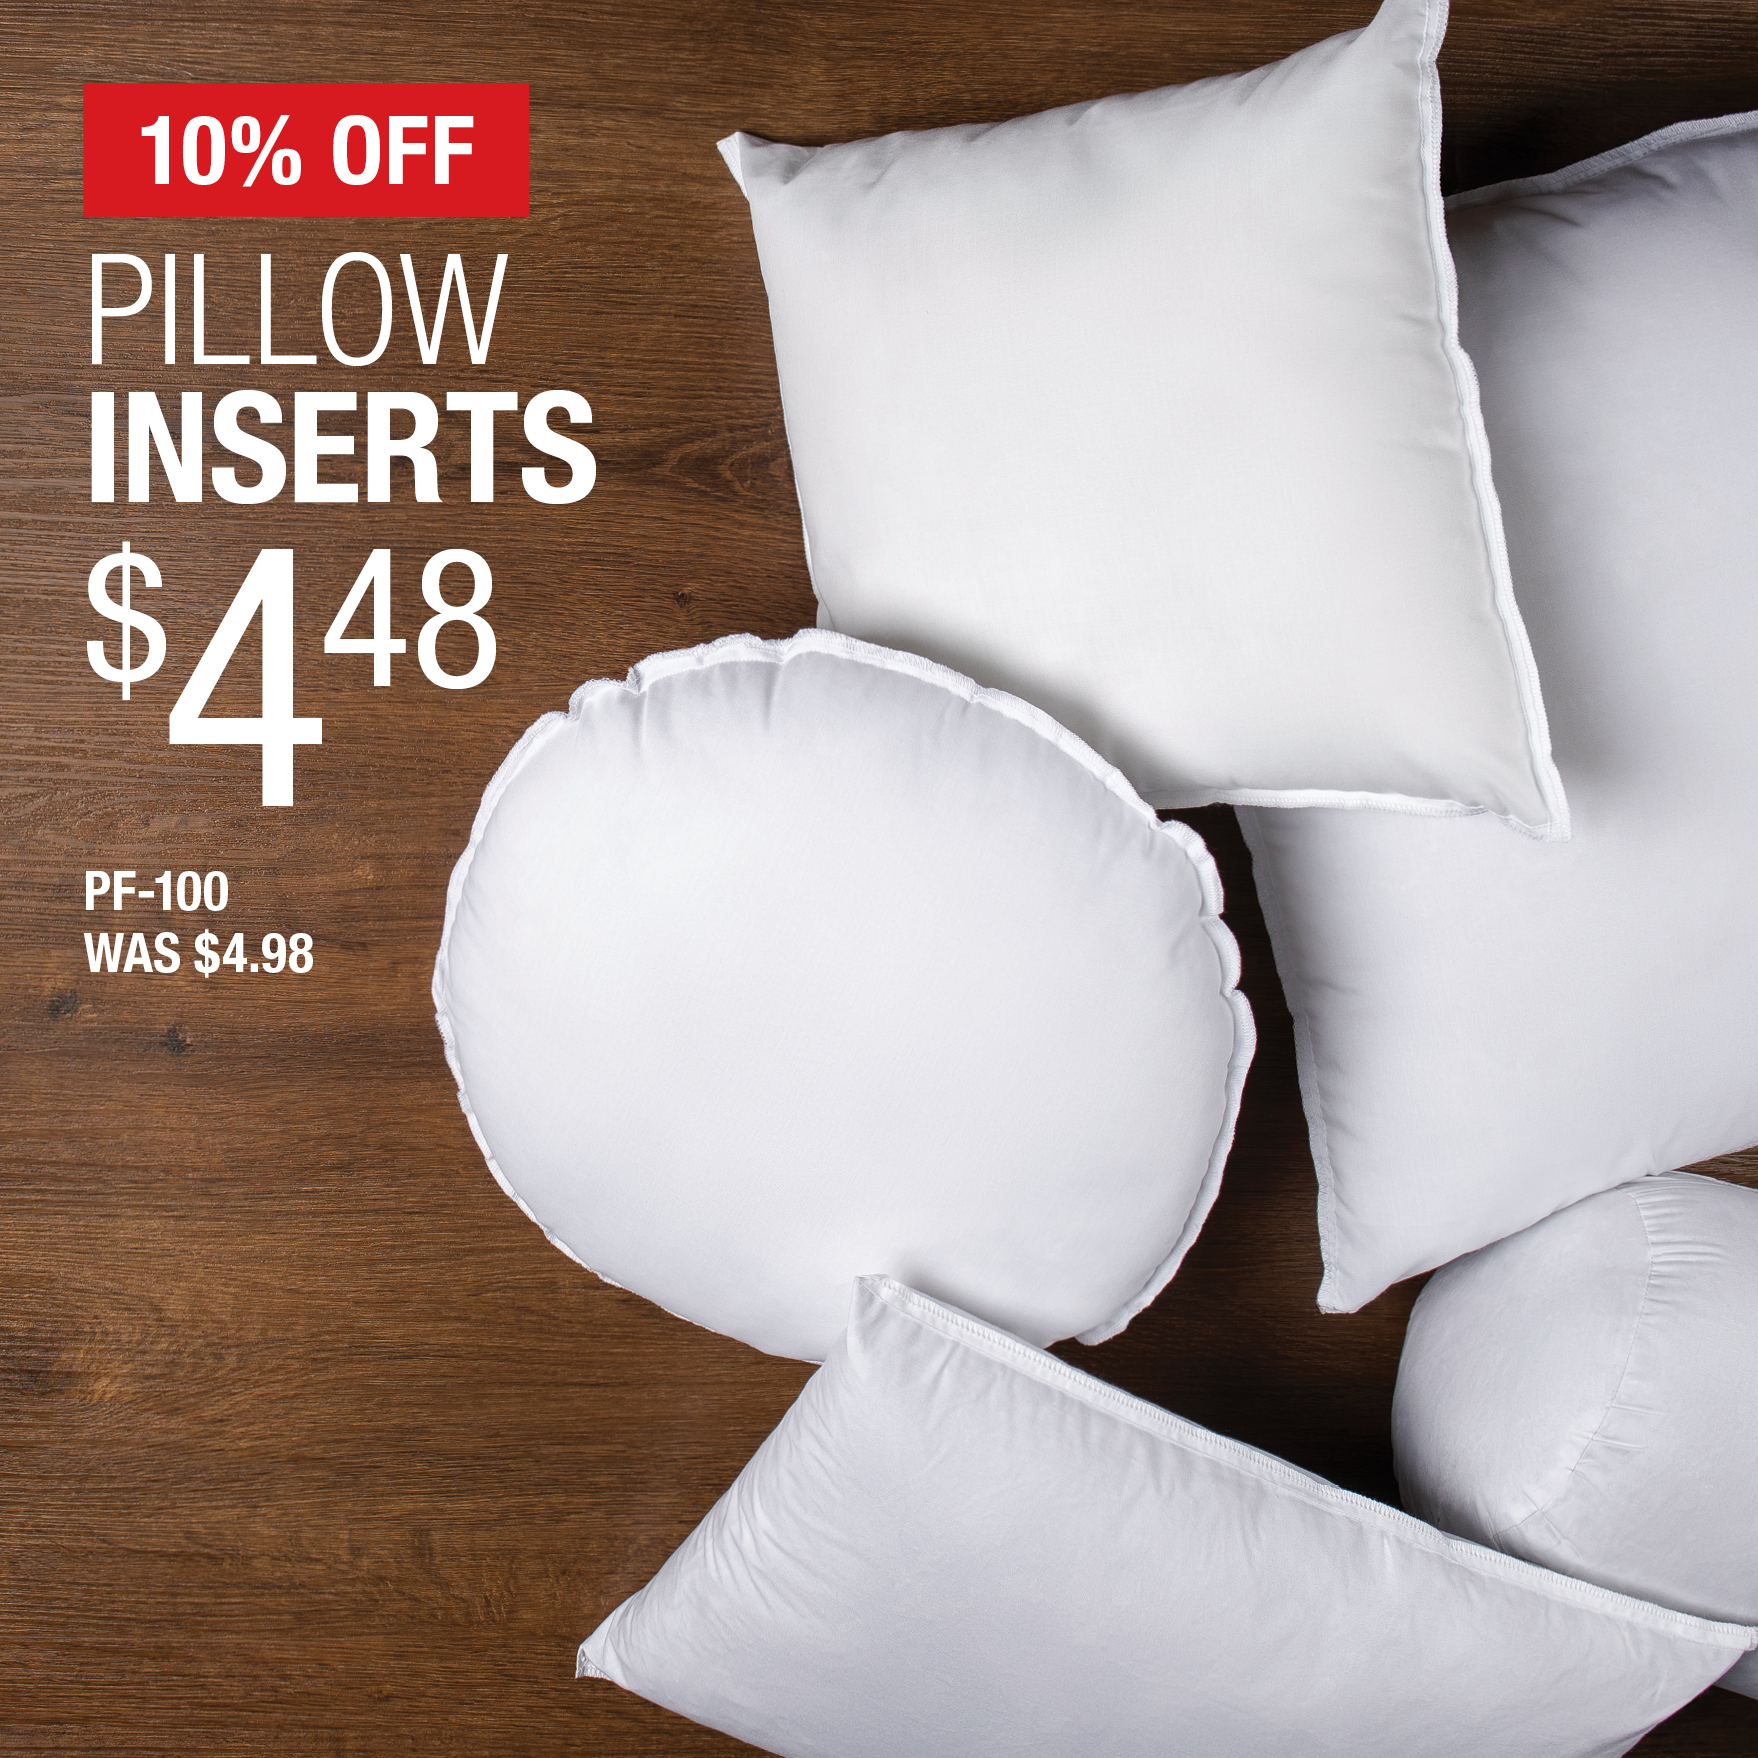 10% Off Pillow Forms $4.48 / PF-100 / Was $4.98.